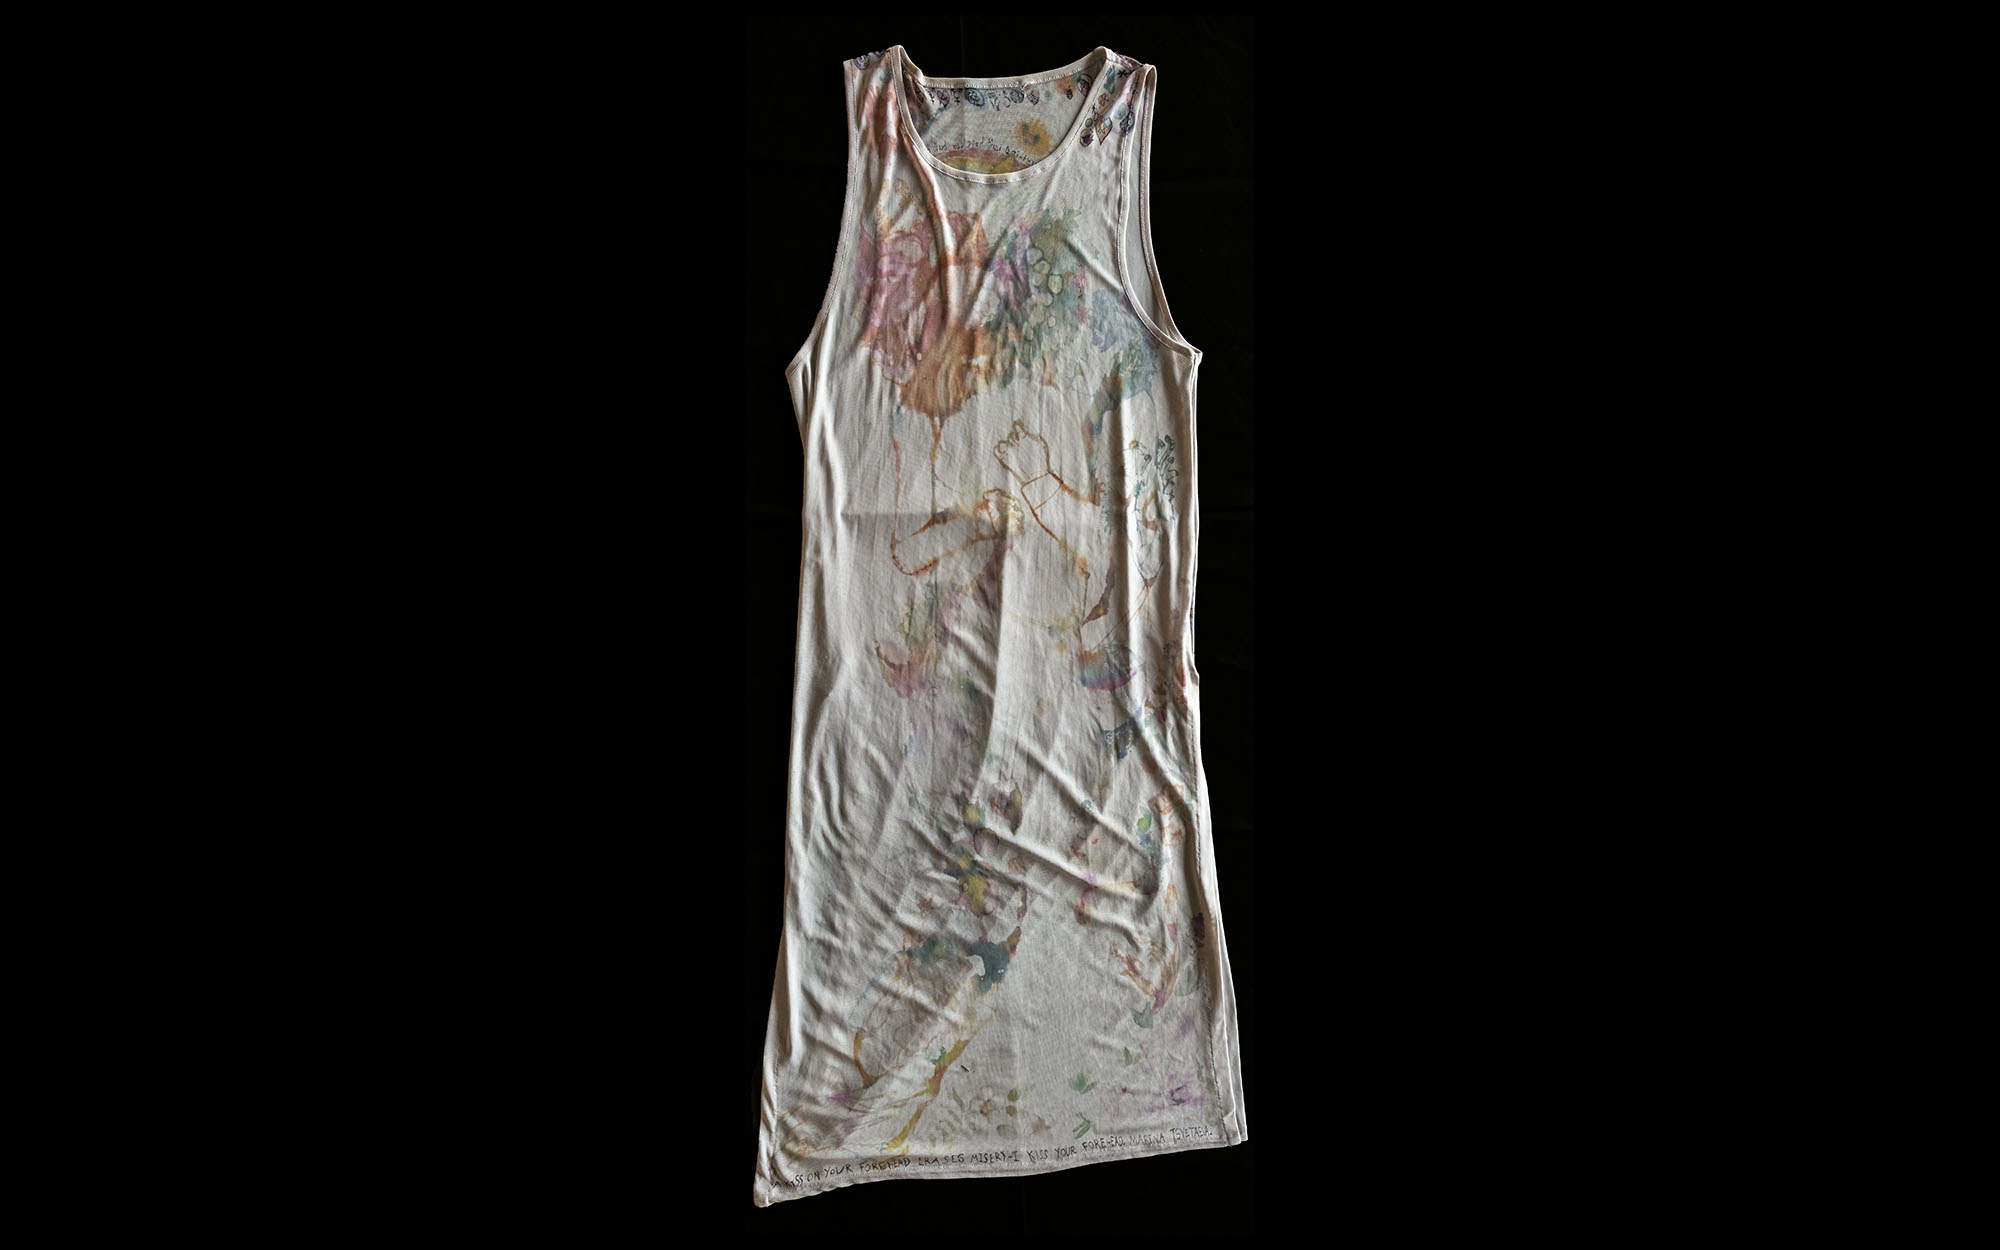 Dress with an array of colourful pictures drawn on it